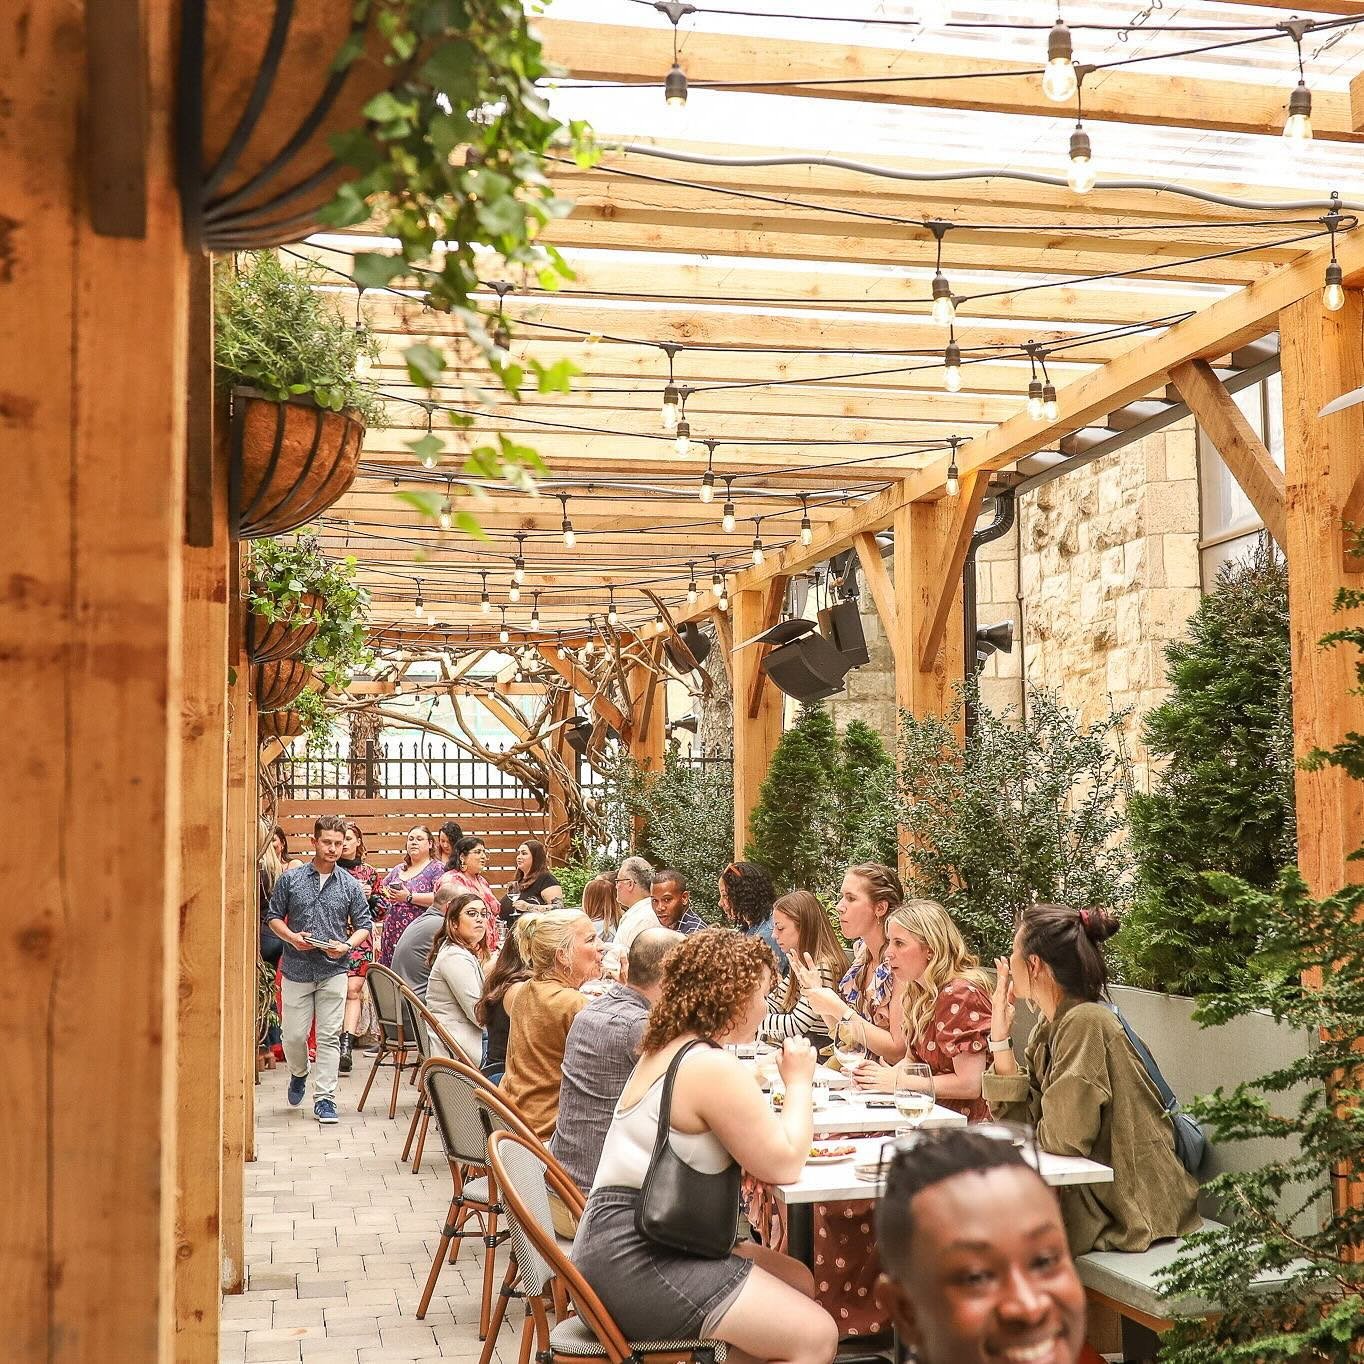 🌼 The Pergola is blooming! Happy Hour 5-7pm open until 10pm.

#philly #phillyfood #phillyfoodiefinder #osteriaphilly #phillypasta #pastanight #pizzanight #northernitalian #springgarden #fairmount #happyhour #phillyhappyhour #outdoordiningdublin